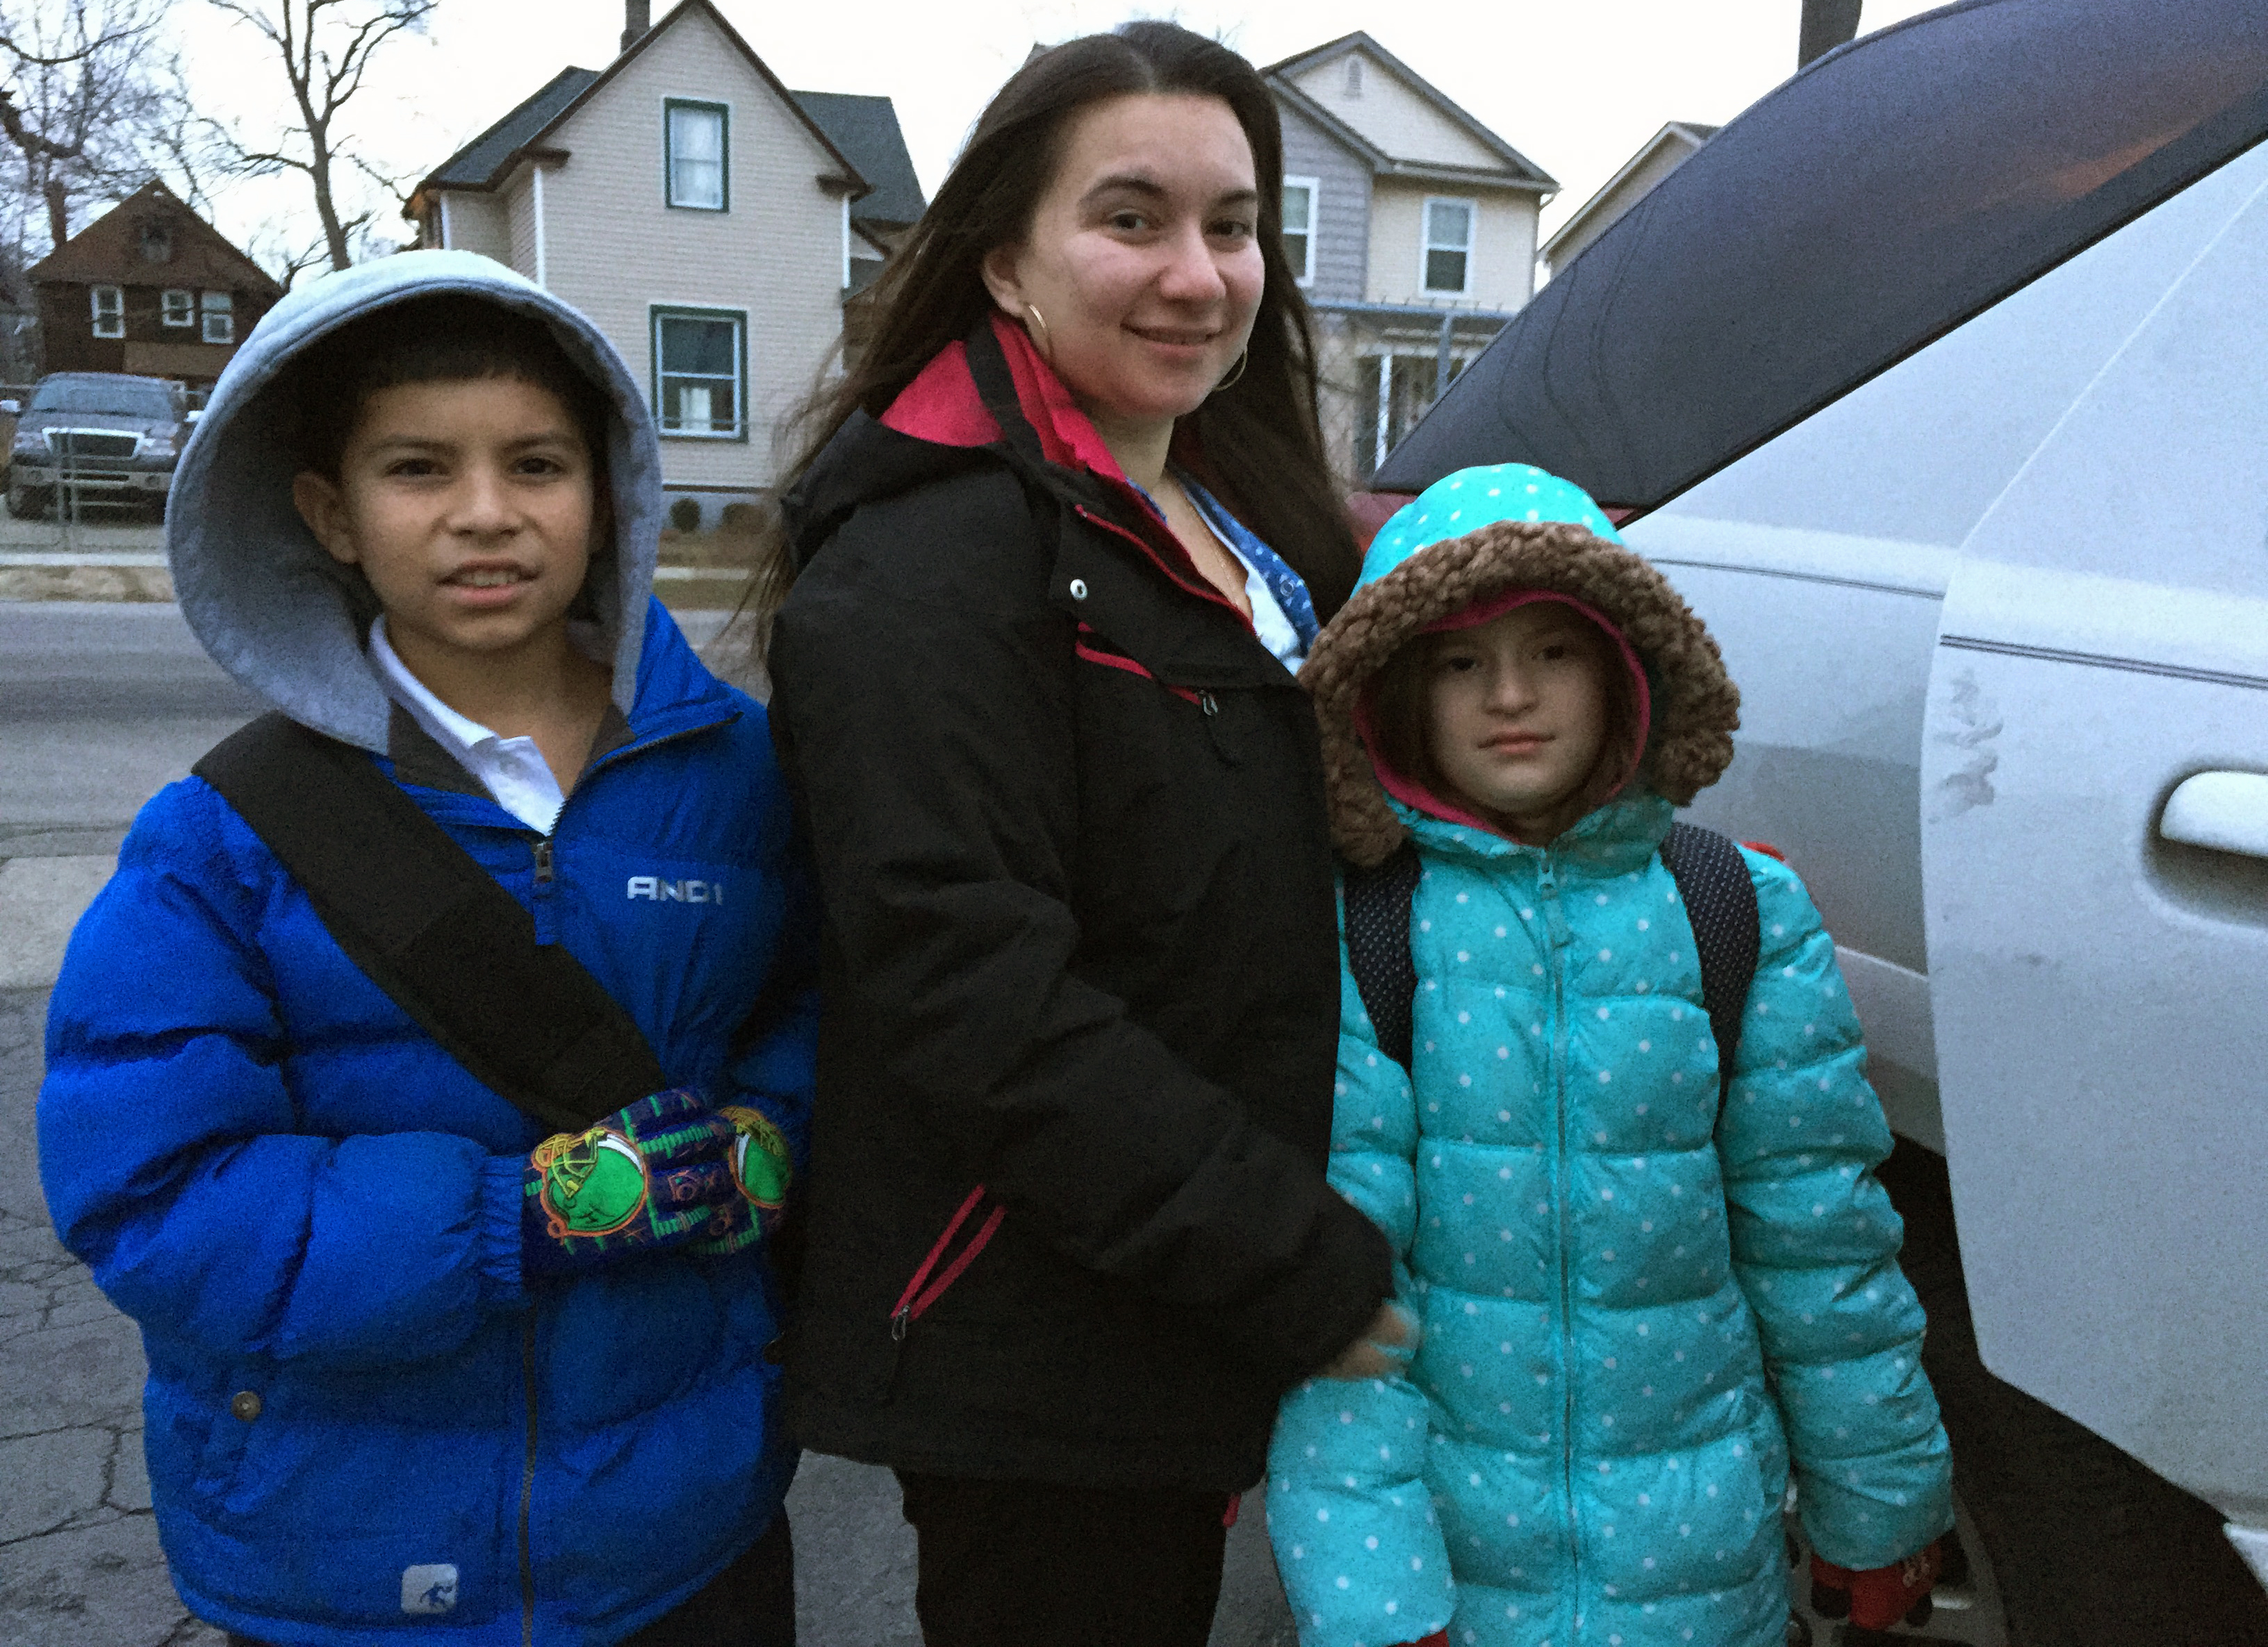 Detroit Public School teacher Alise Anaya with her children Victor, 10, and Analise, 8, before they head to a public school in Southwest Detroit from their home in a nearby suburb. (Erin Einhorn)